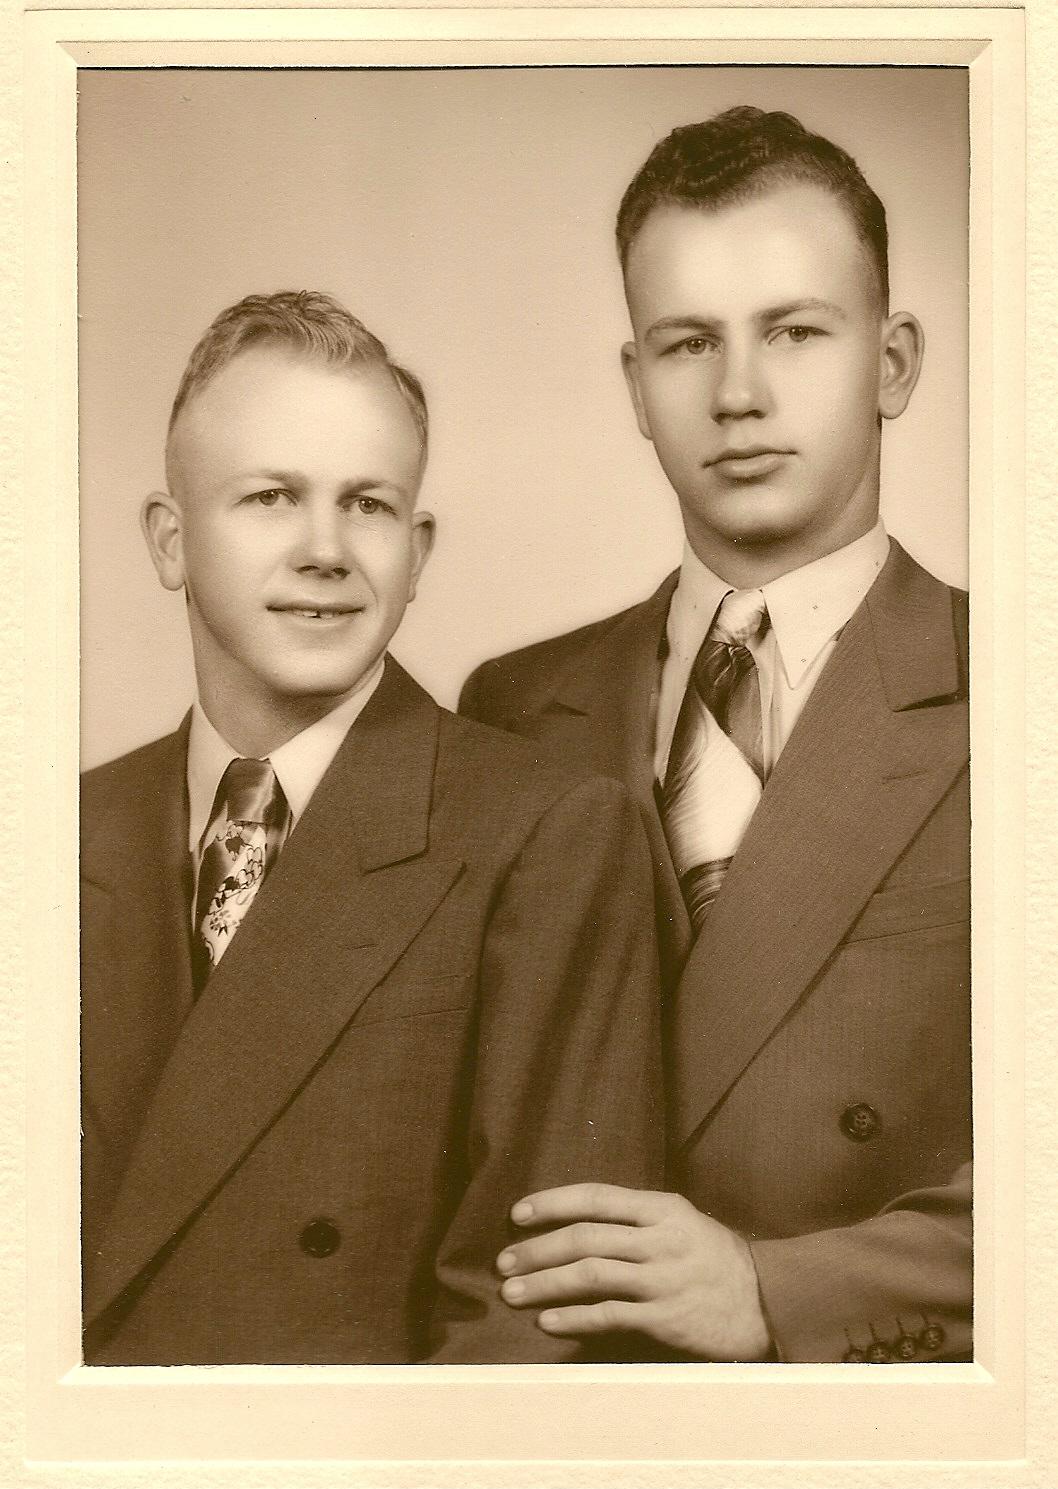 Norris Emmanuel and Stanly L. Bergstrom son of Norris E. Bergstrom